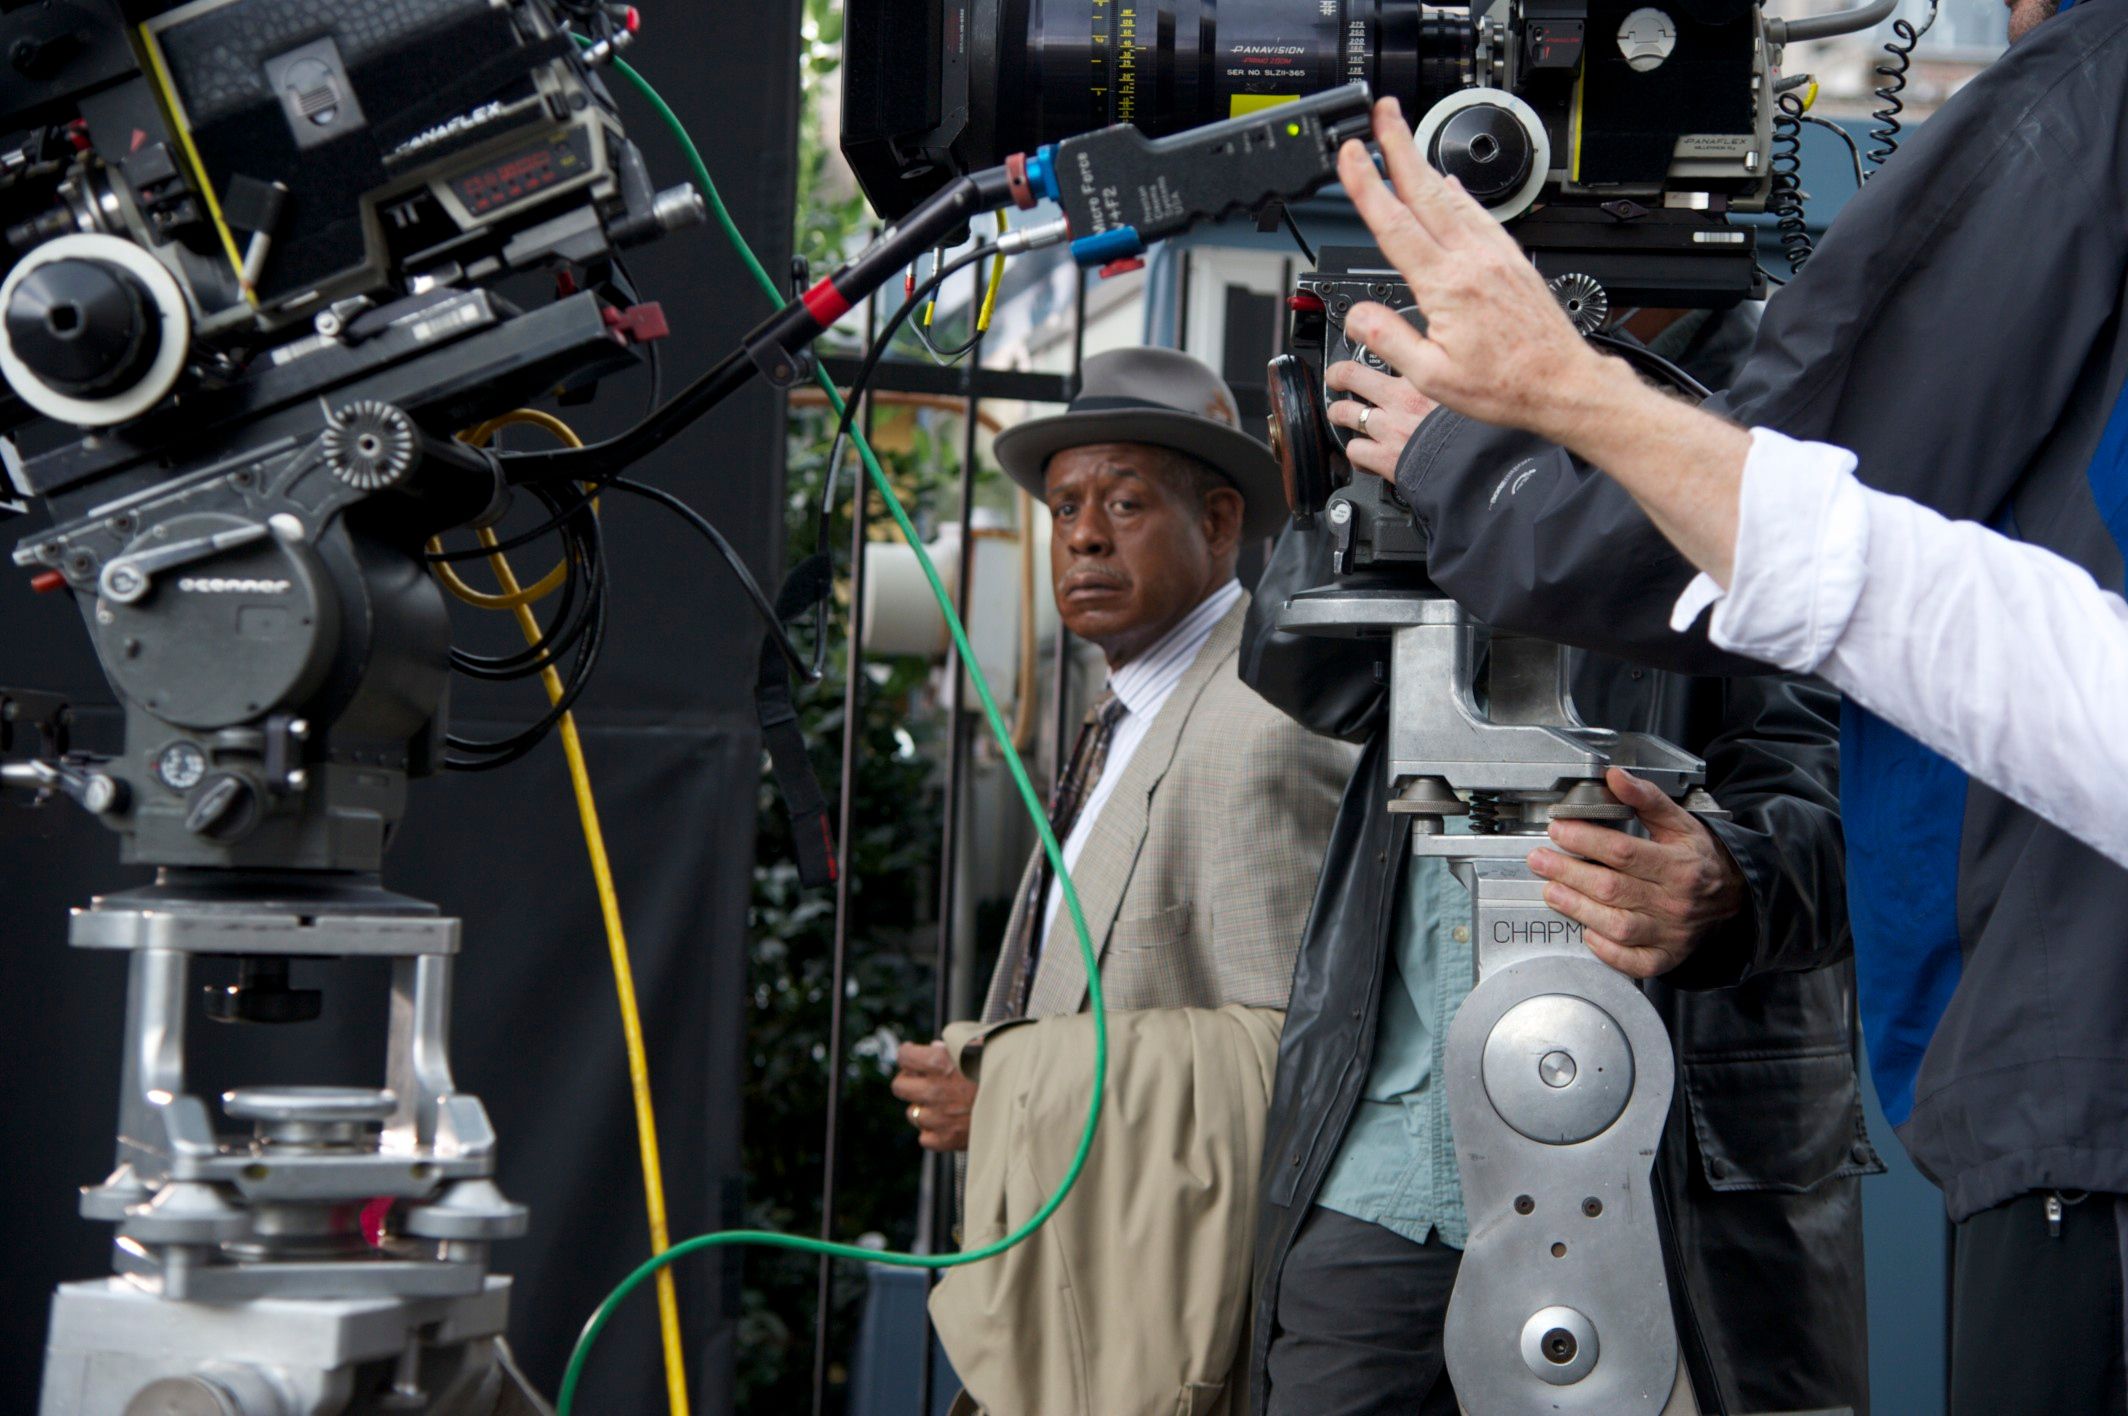 The Butler Behind the Scenes Photo